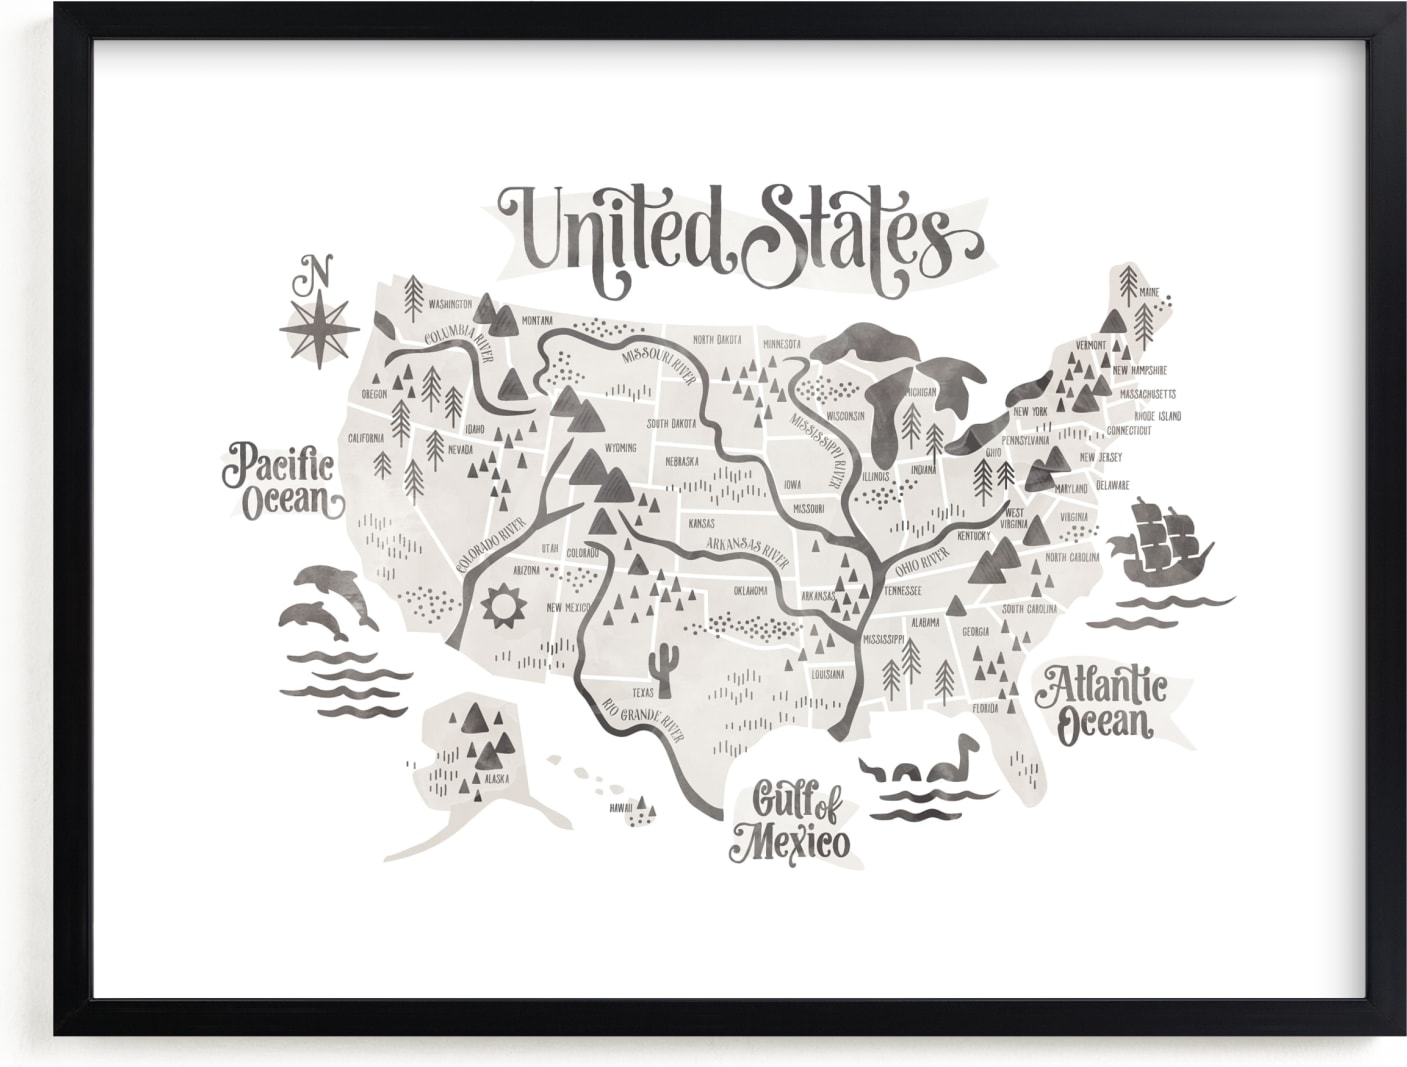 This is a brown art by Jessie Steury called Pirate Map.